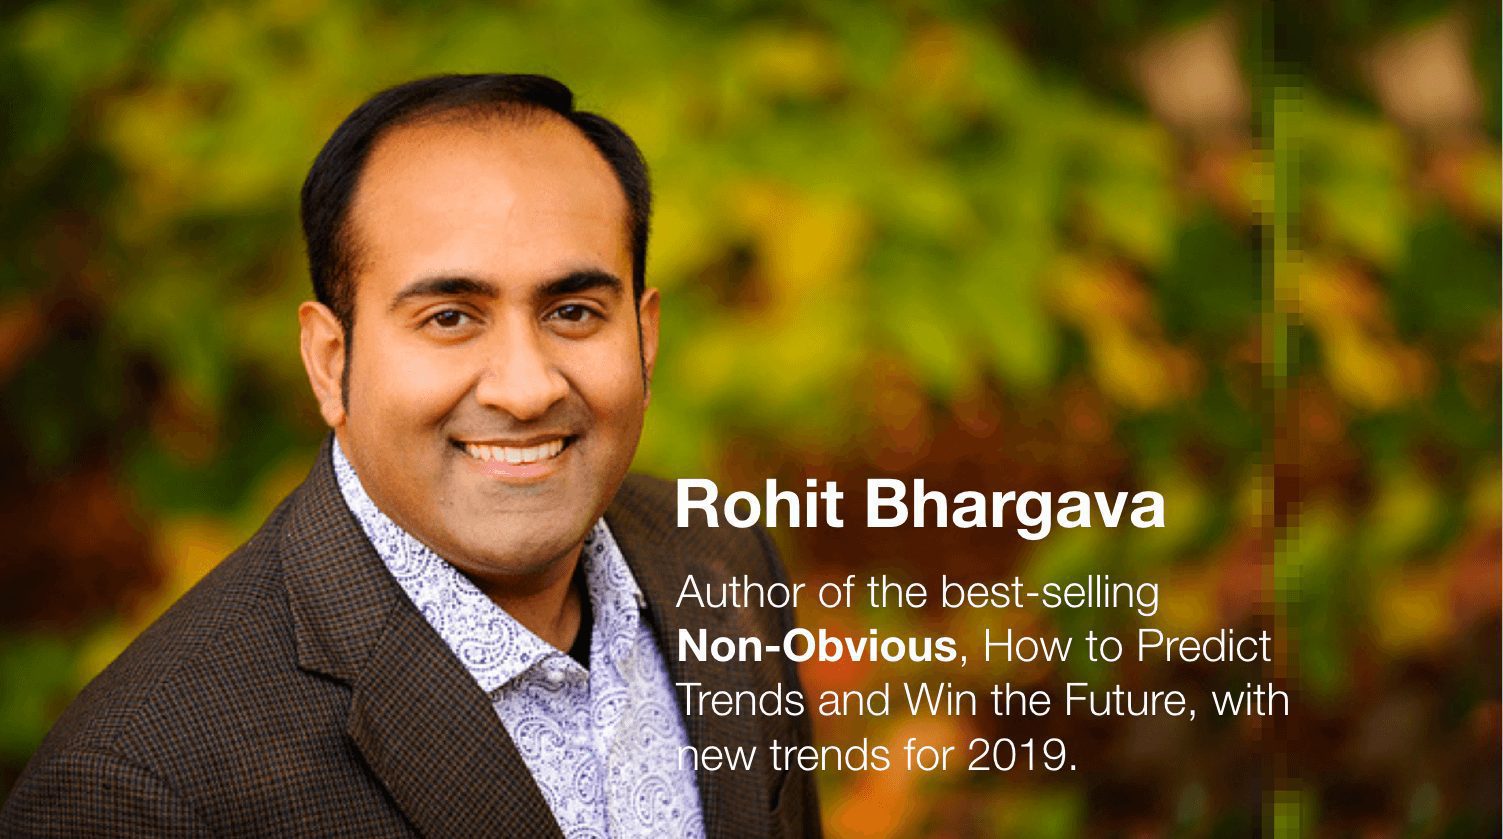 The Non-Obvious Trends for 2019 with Rohit Bhargava (MDE315)